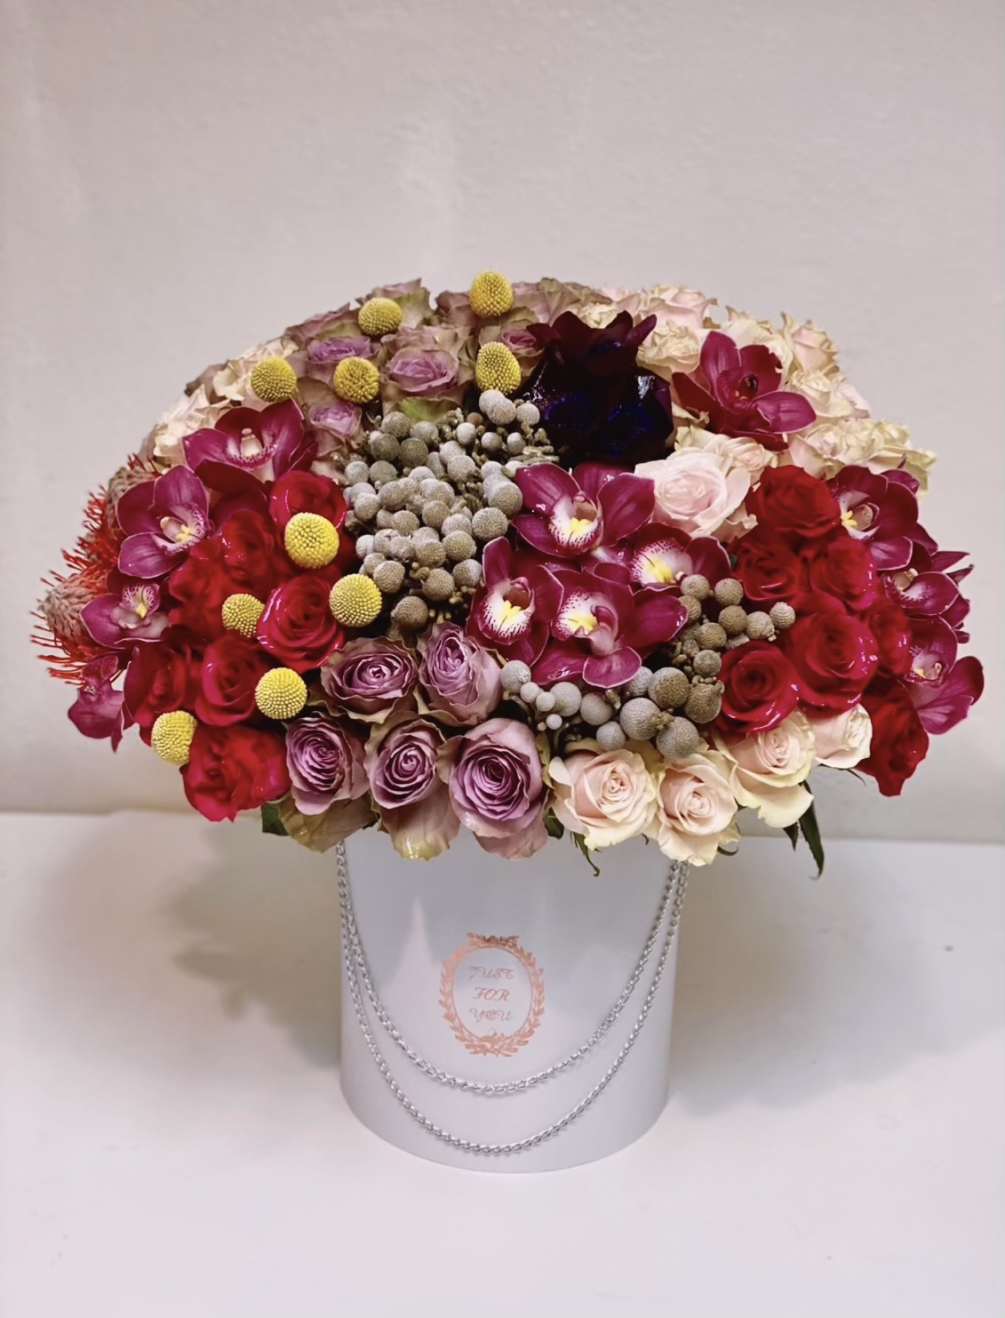 Send our truly original arrangement to let your special someone bring nature